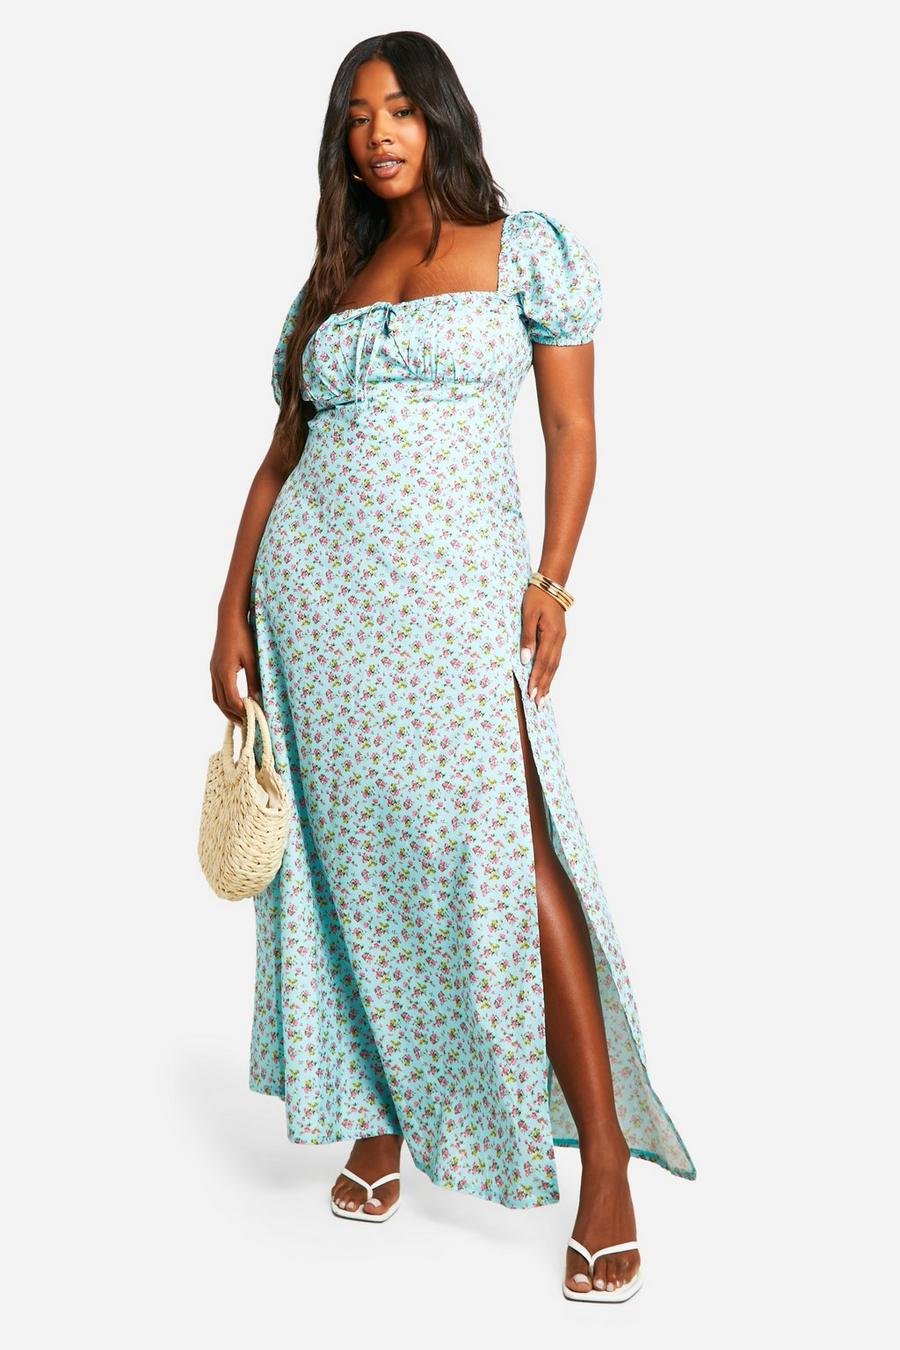 Blue Plus Woven Floral Printed Milkmaid Midaxi Dress